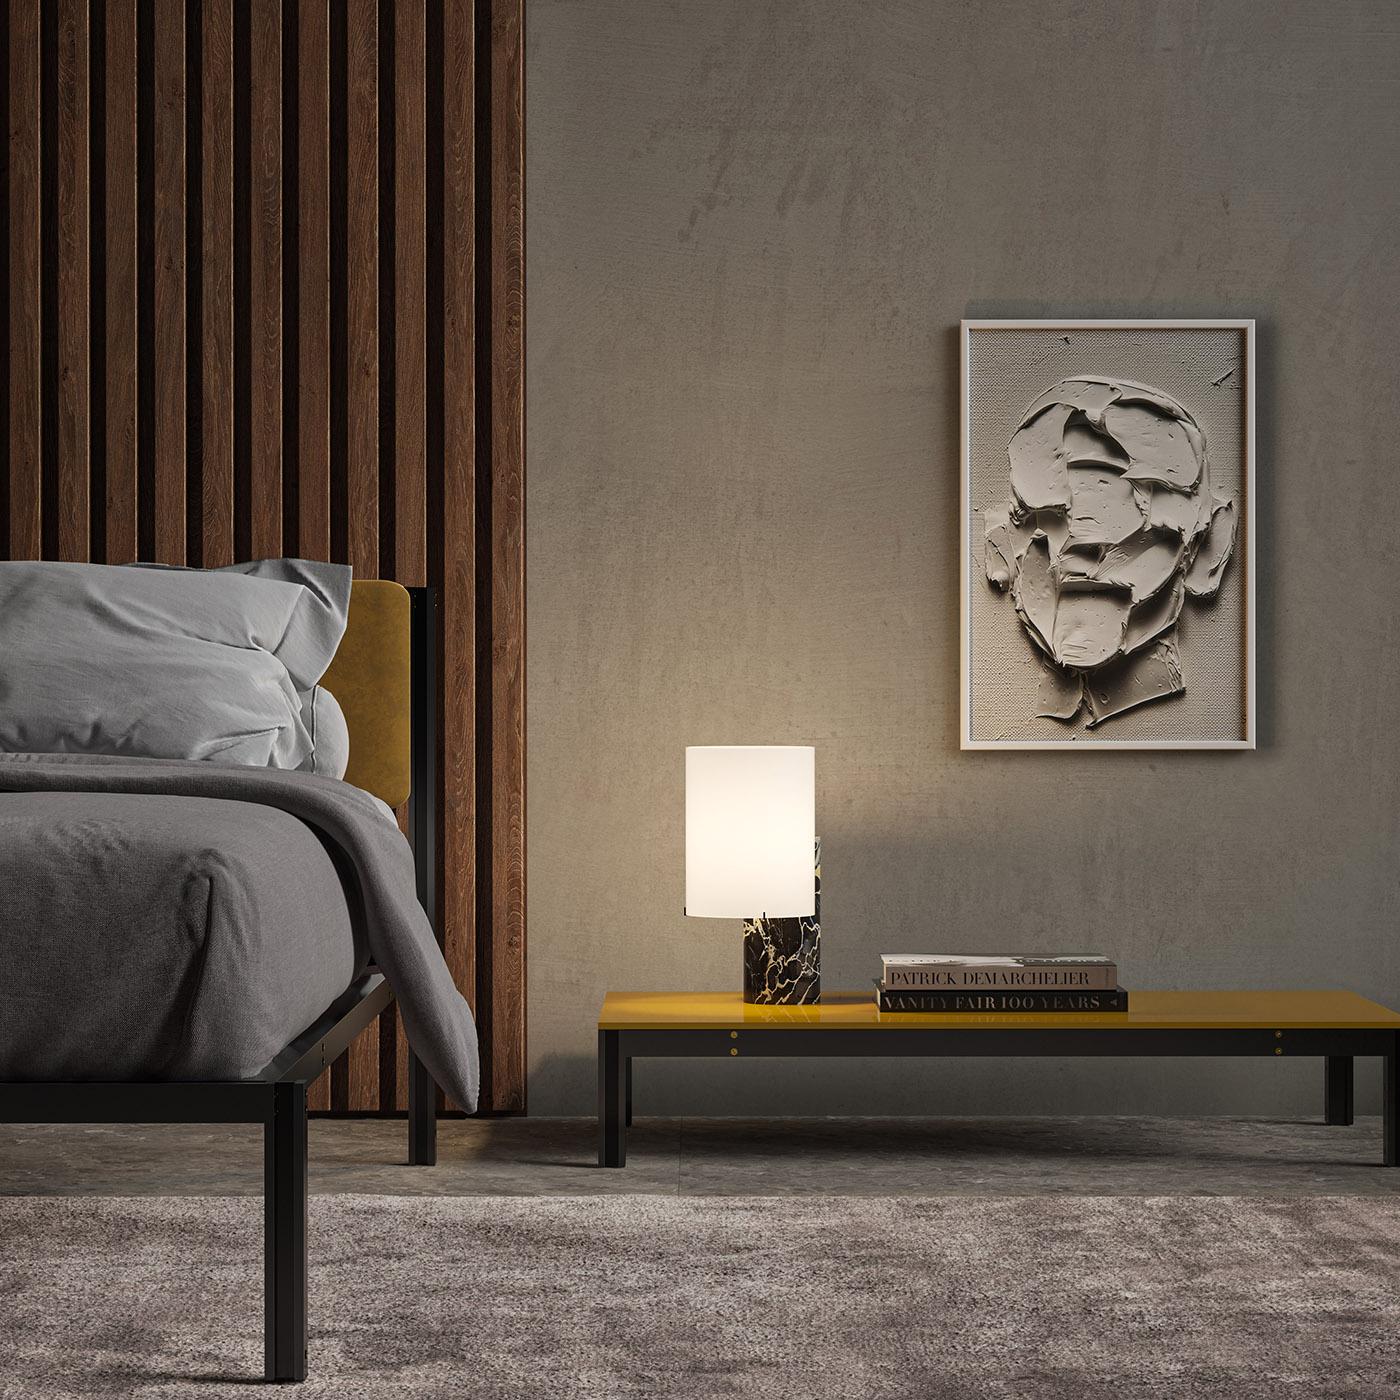 A celebration of simplicity, this gorgeous table lamp is handcrafted of first-rate materials rendered in a sleek and pure form. Mounted on a spectacular Portoro marble body, the satin white shade is made of polycarbonate. Designed by Matteo